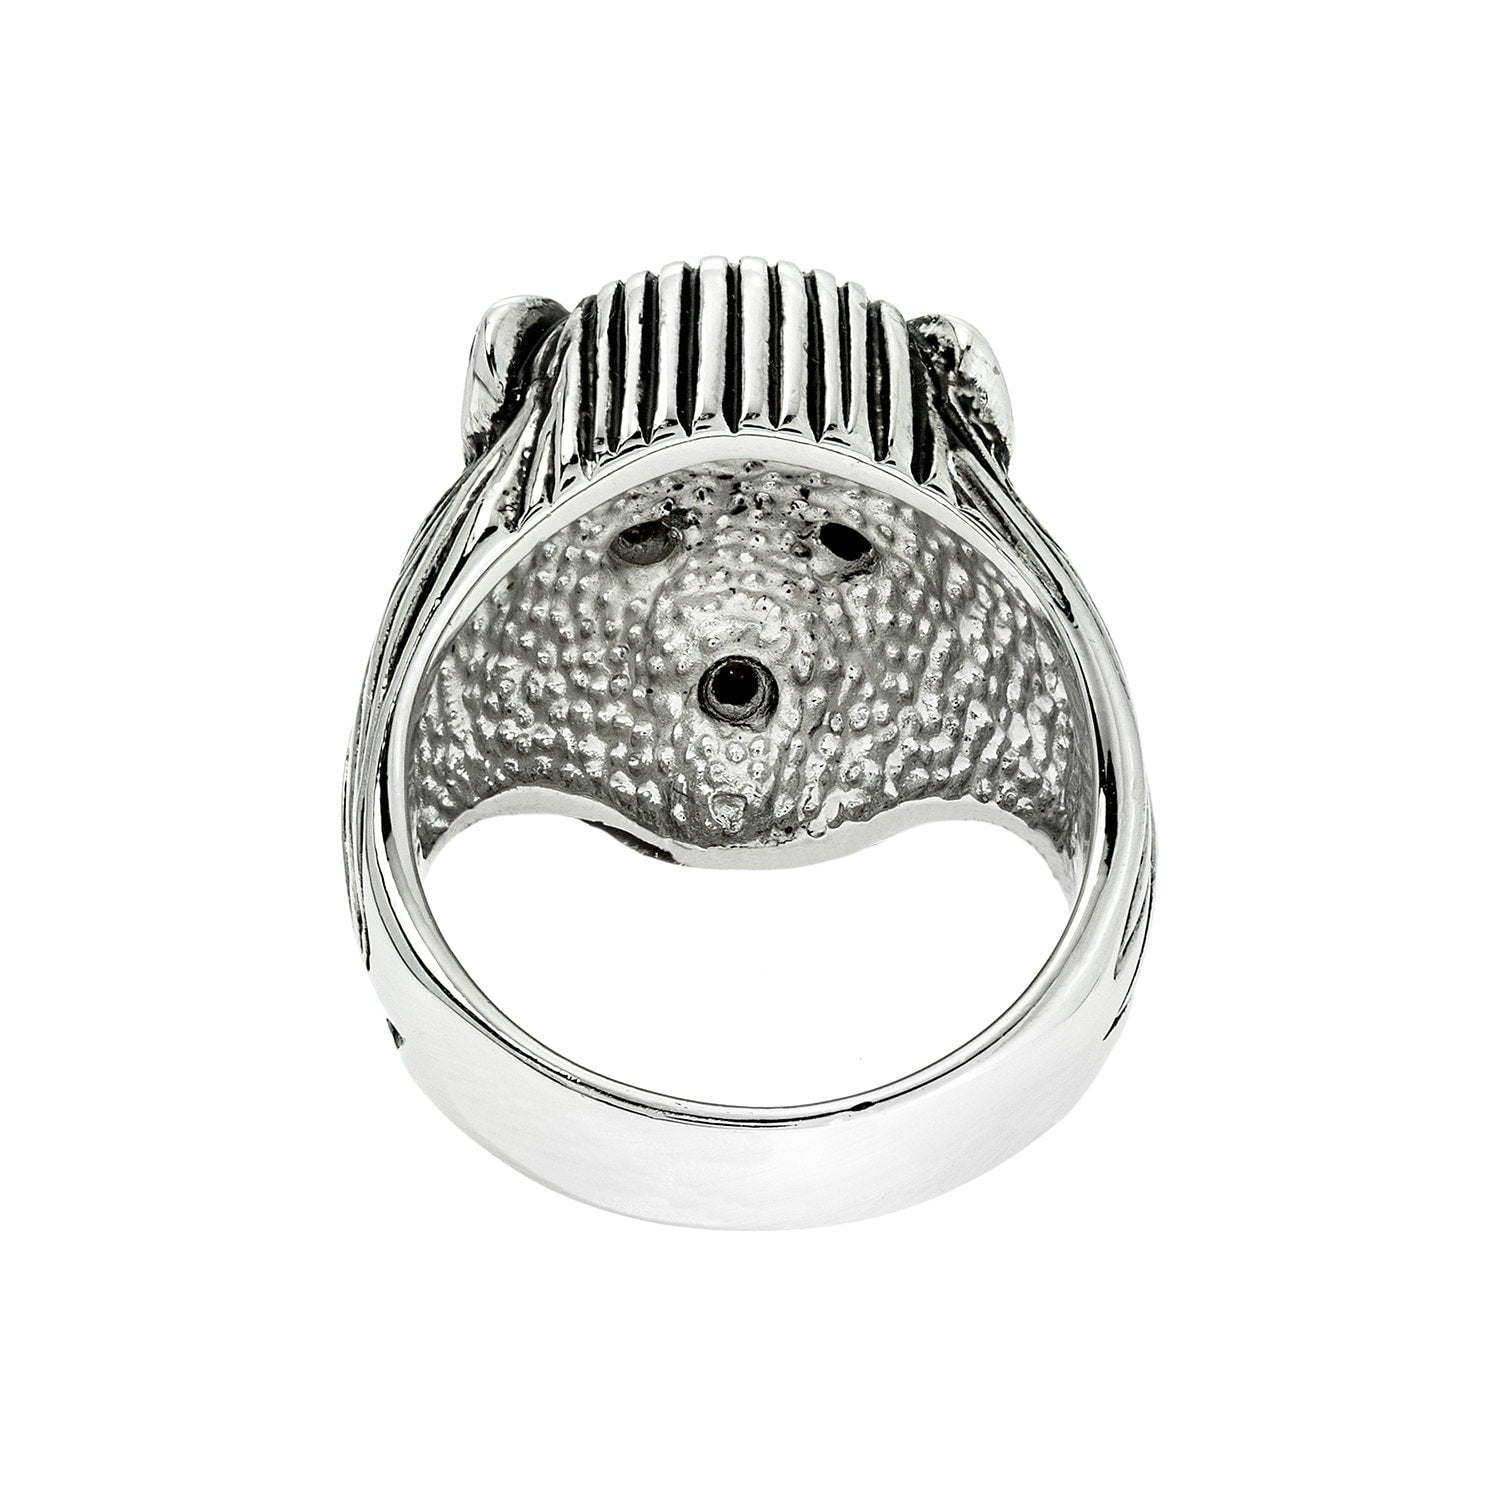 Vintage Ring Zodiac Birthstone Lion Ring White Gold Silver Antique Mens Jewelry R1310 - Limited Stock - Never Worn